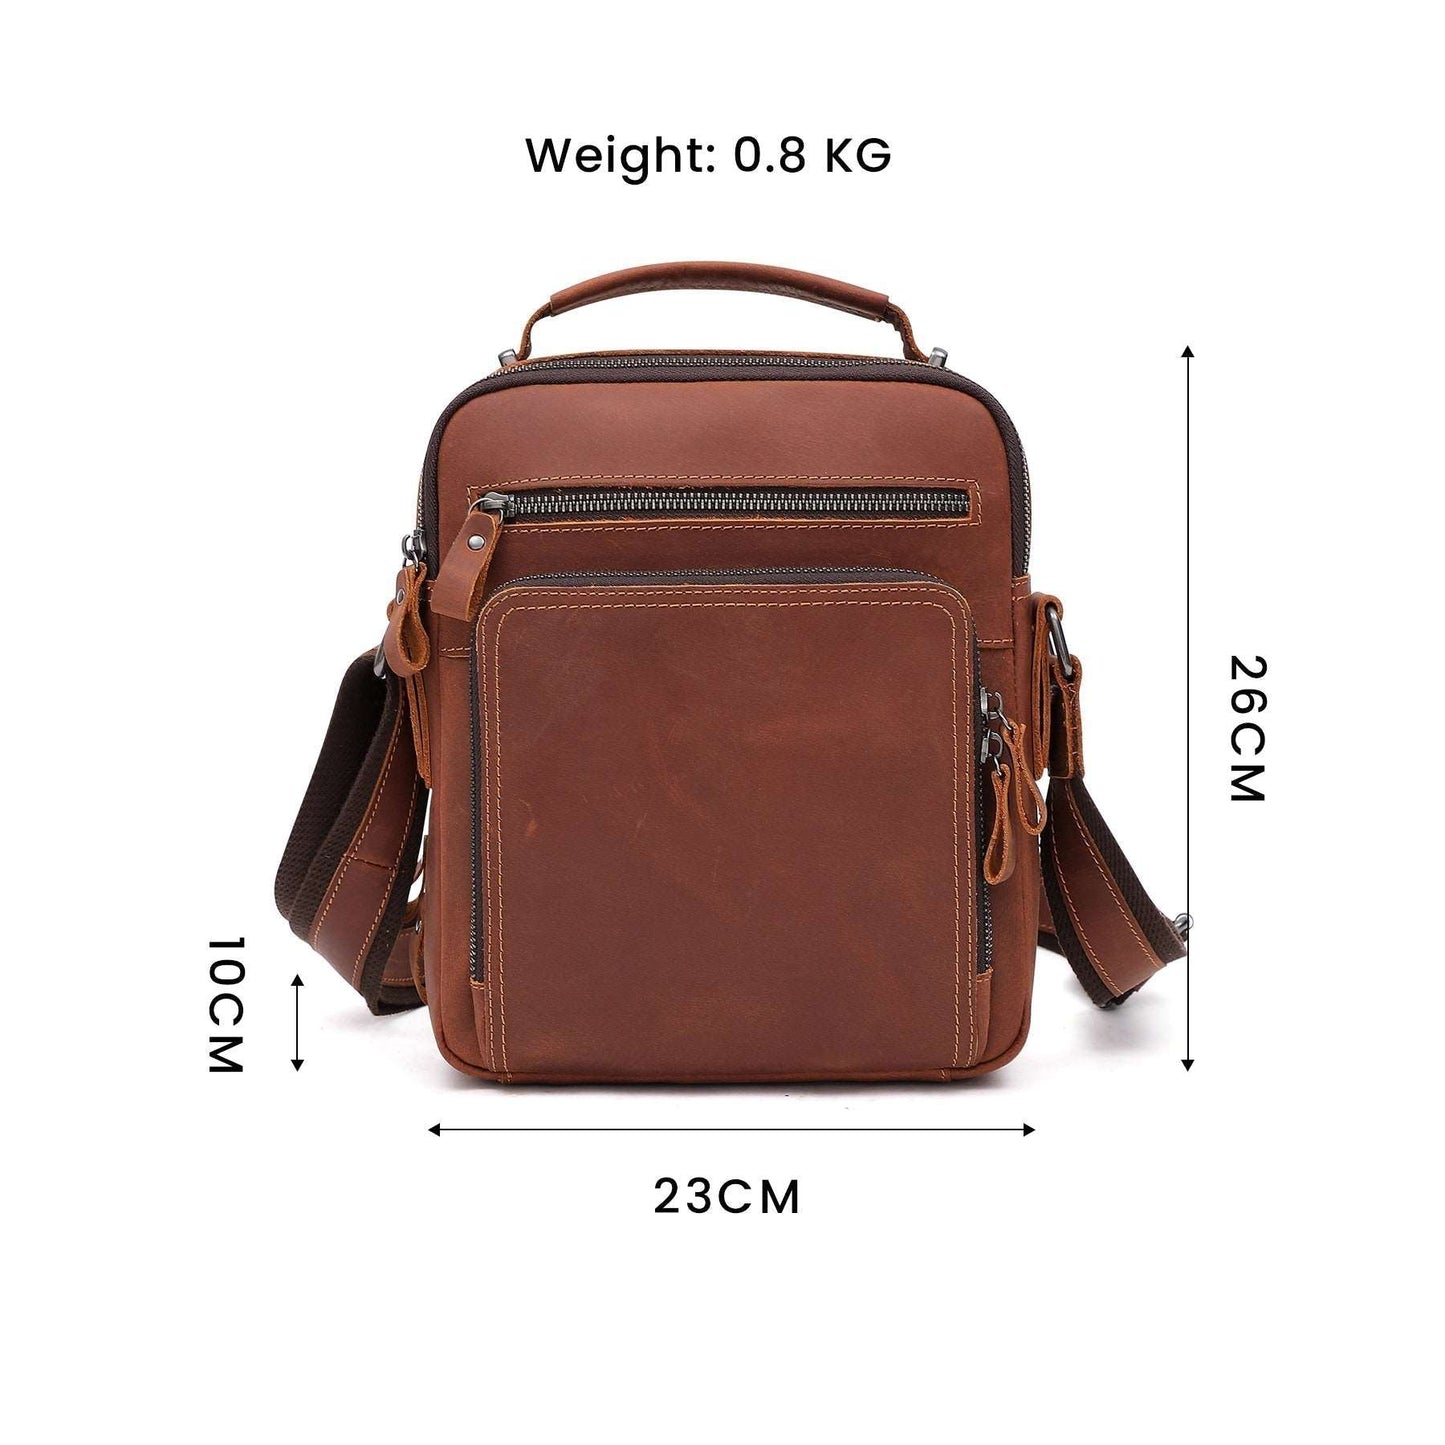 Vintage-Inspired Leather Satchel for Him Woyaza